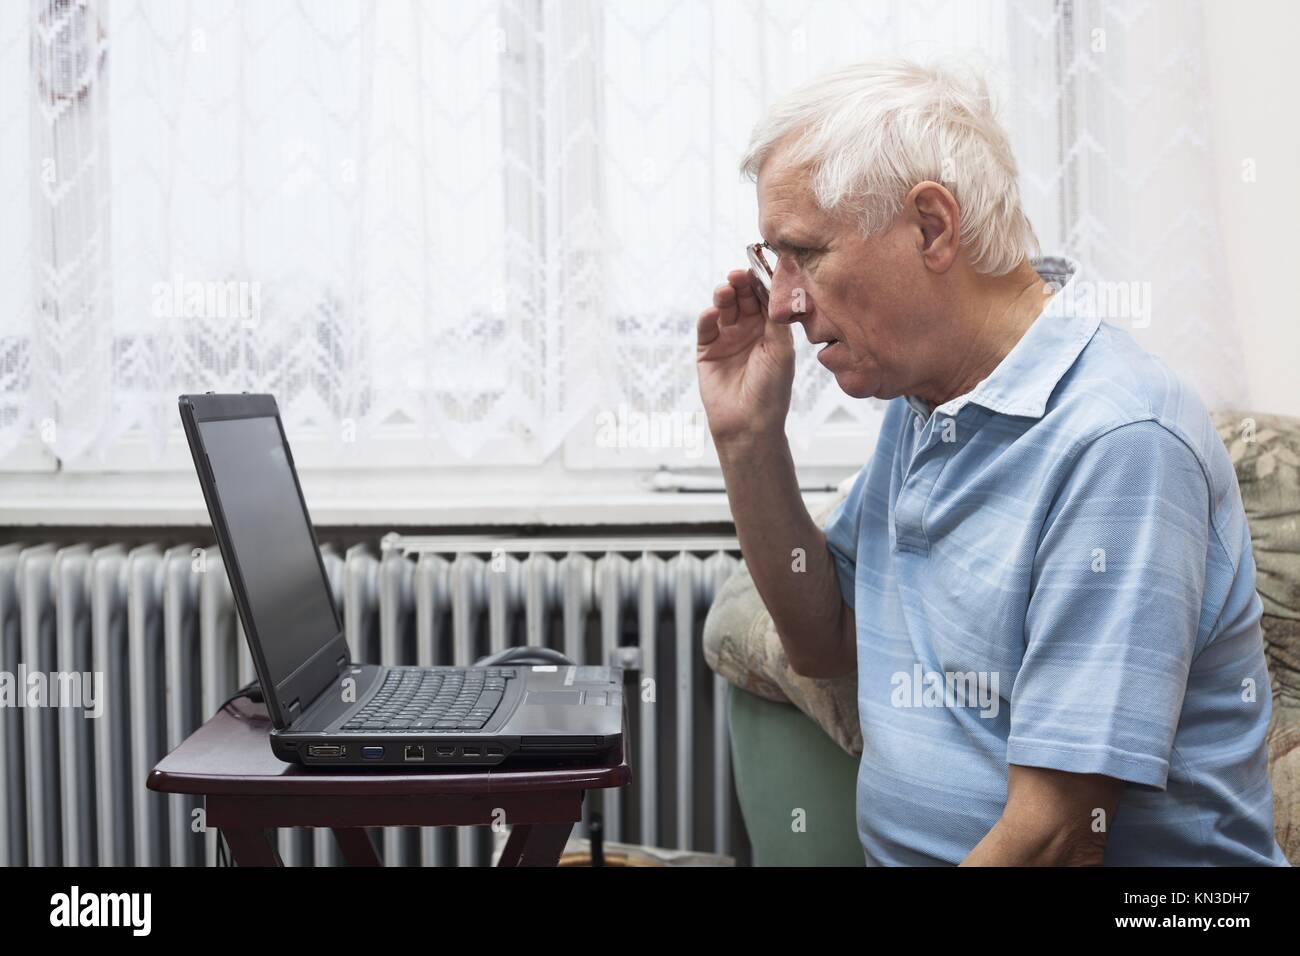 Senior man learning to use a computer at home. Stock Photo